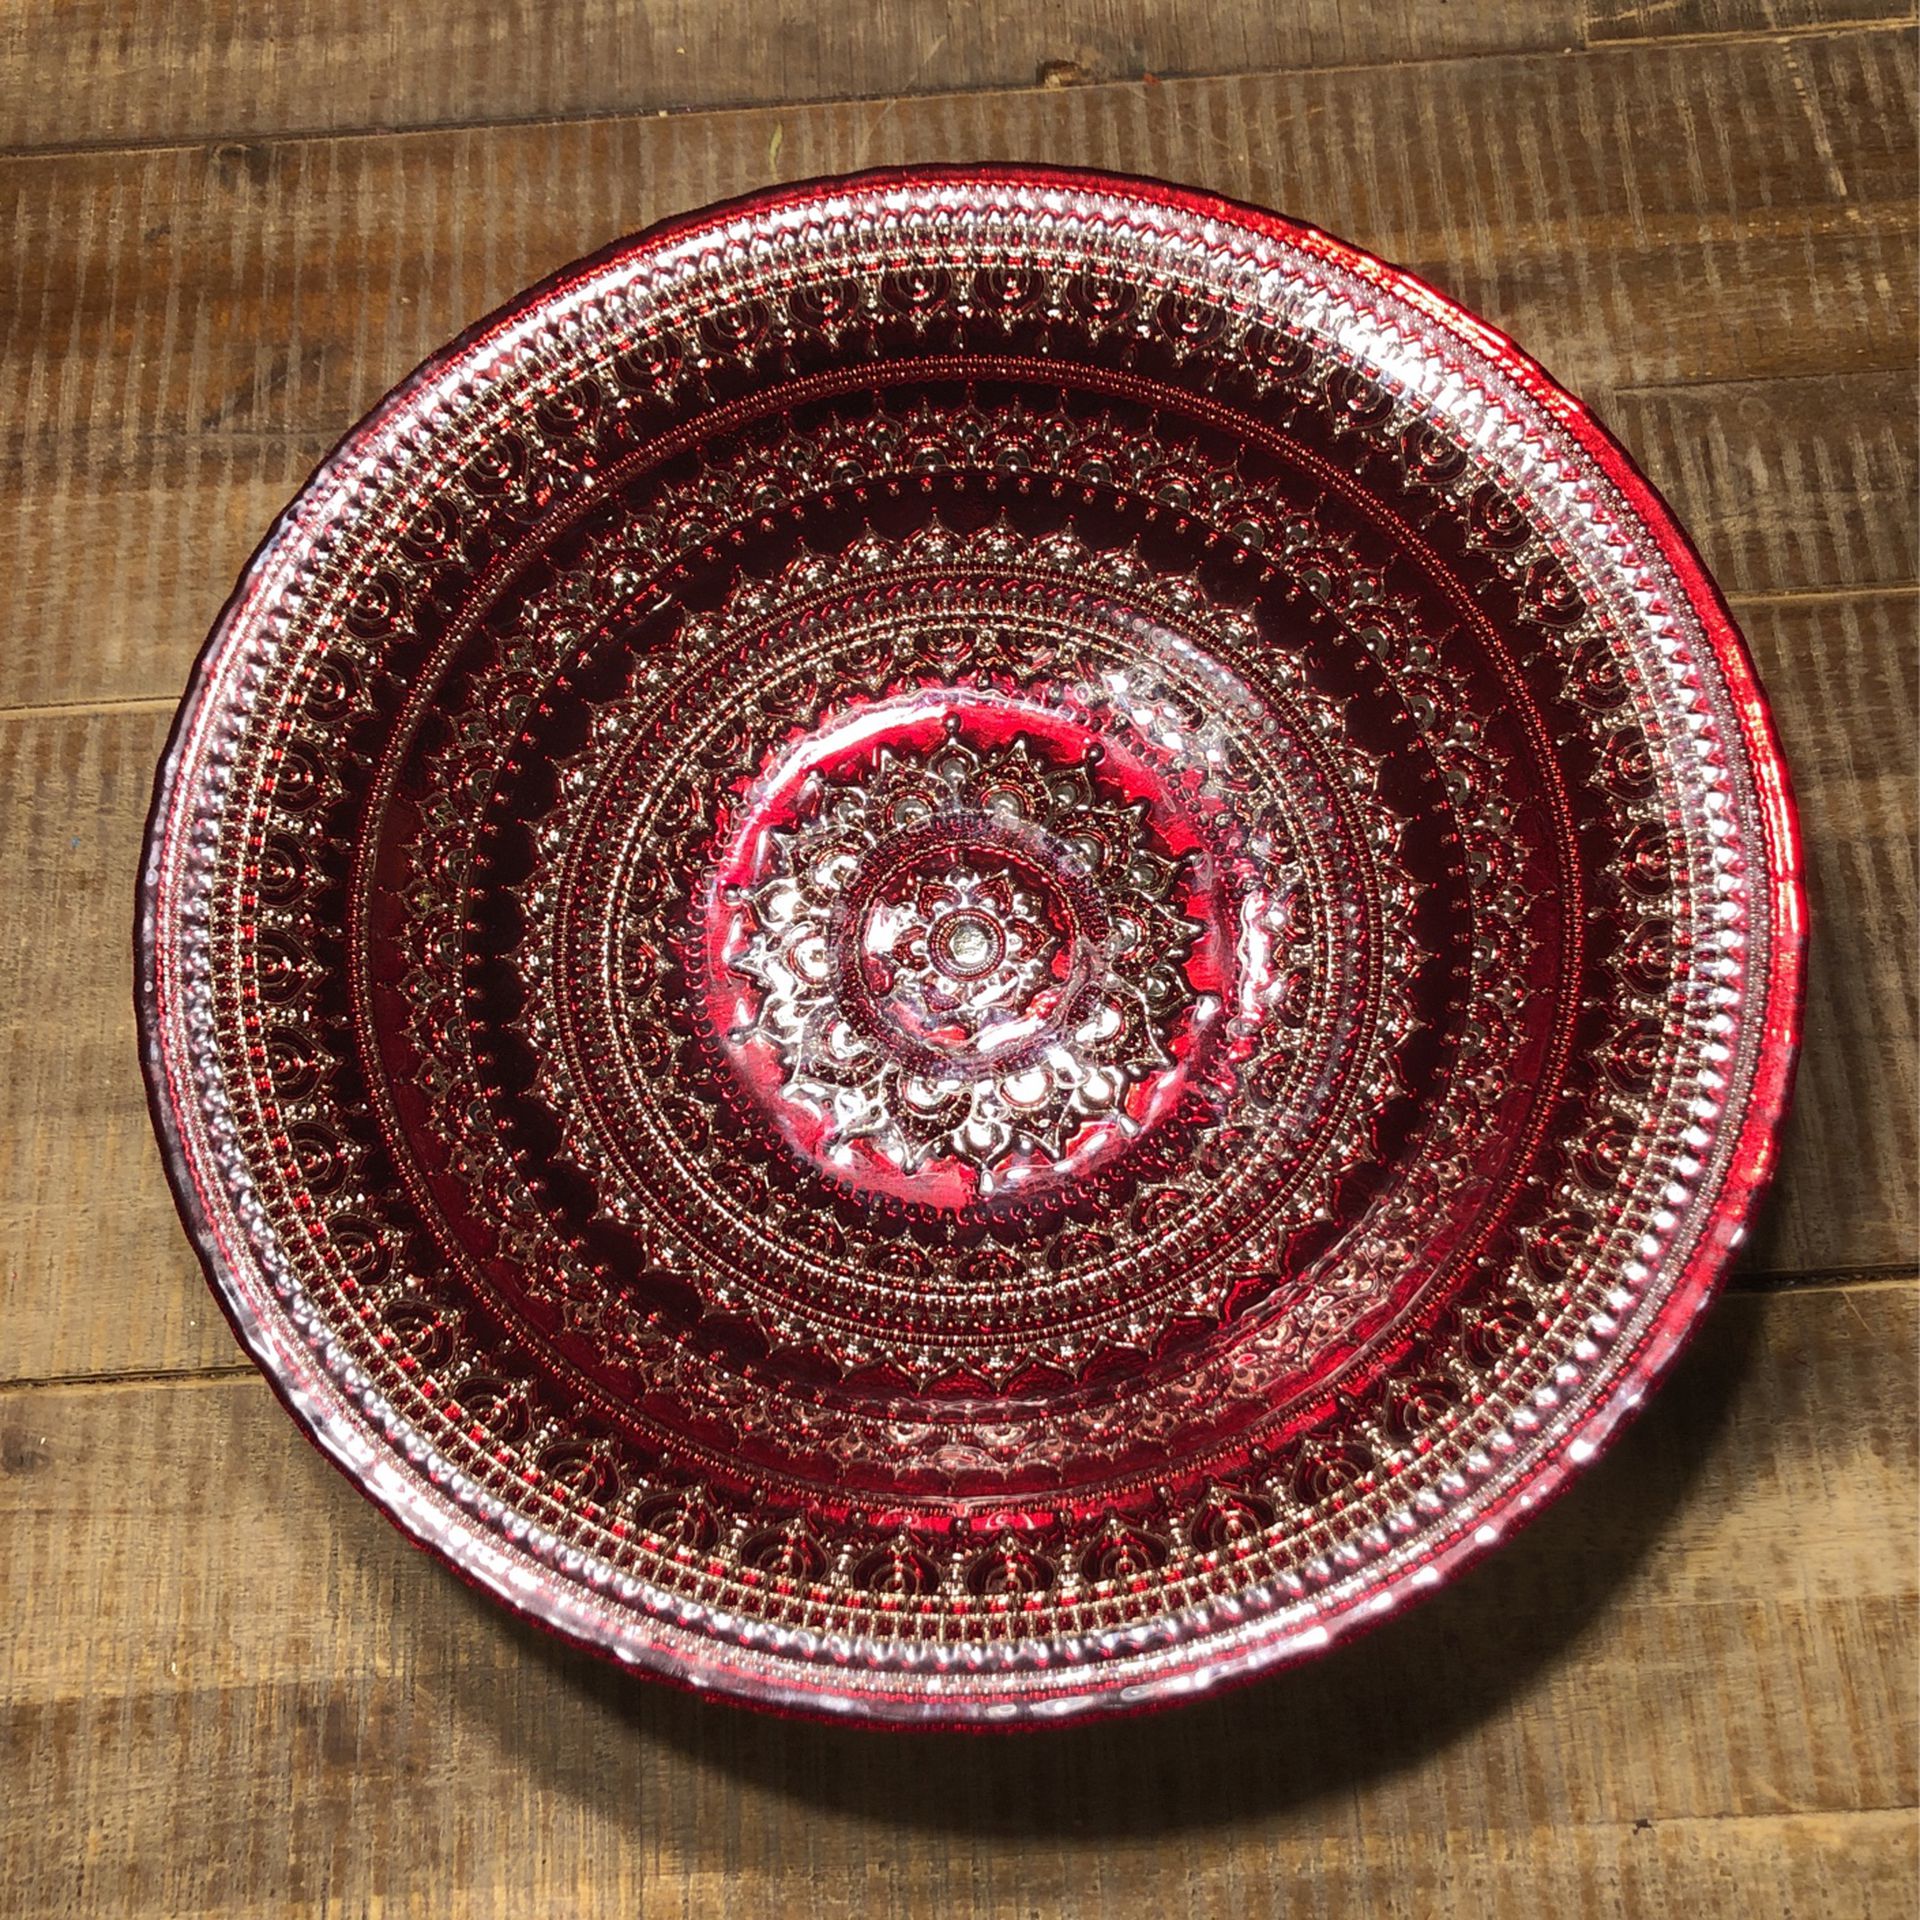 Red/Silver Decorative Bowl